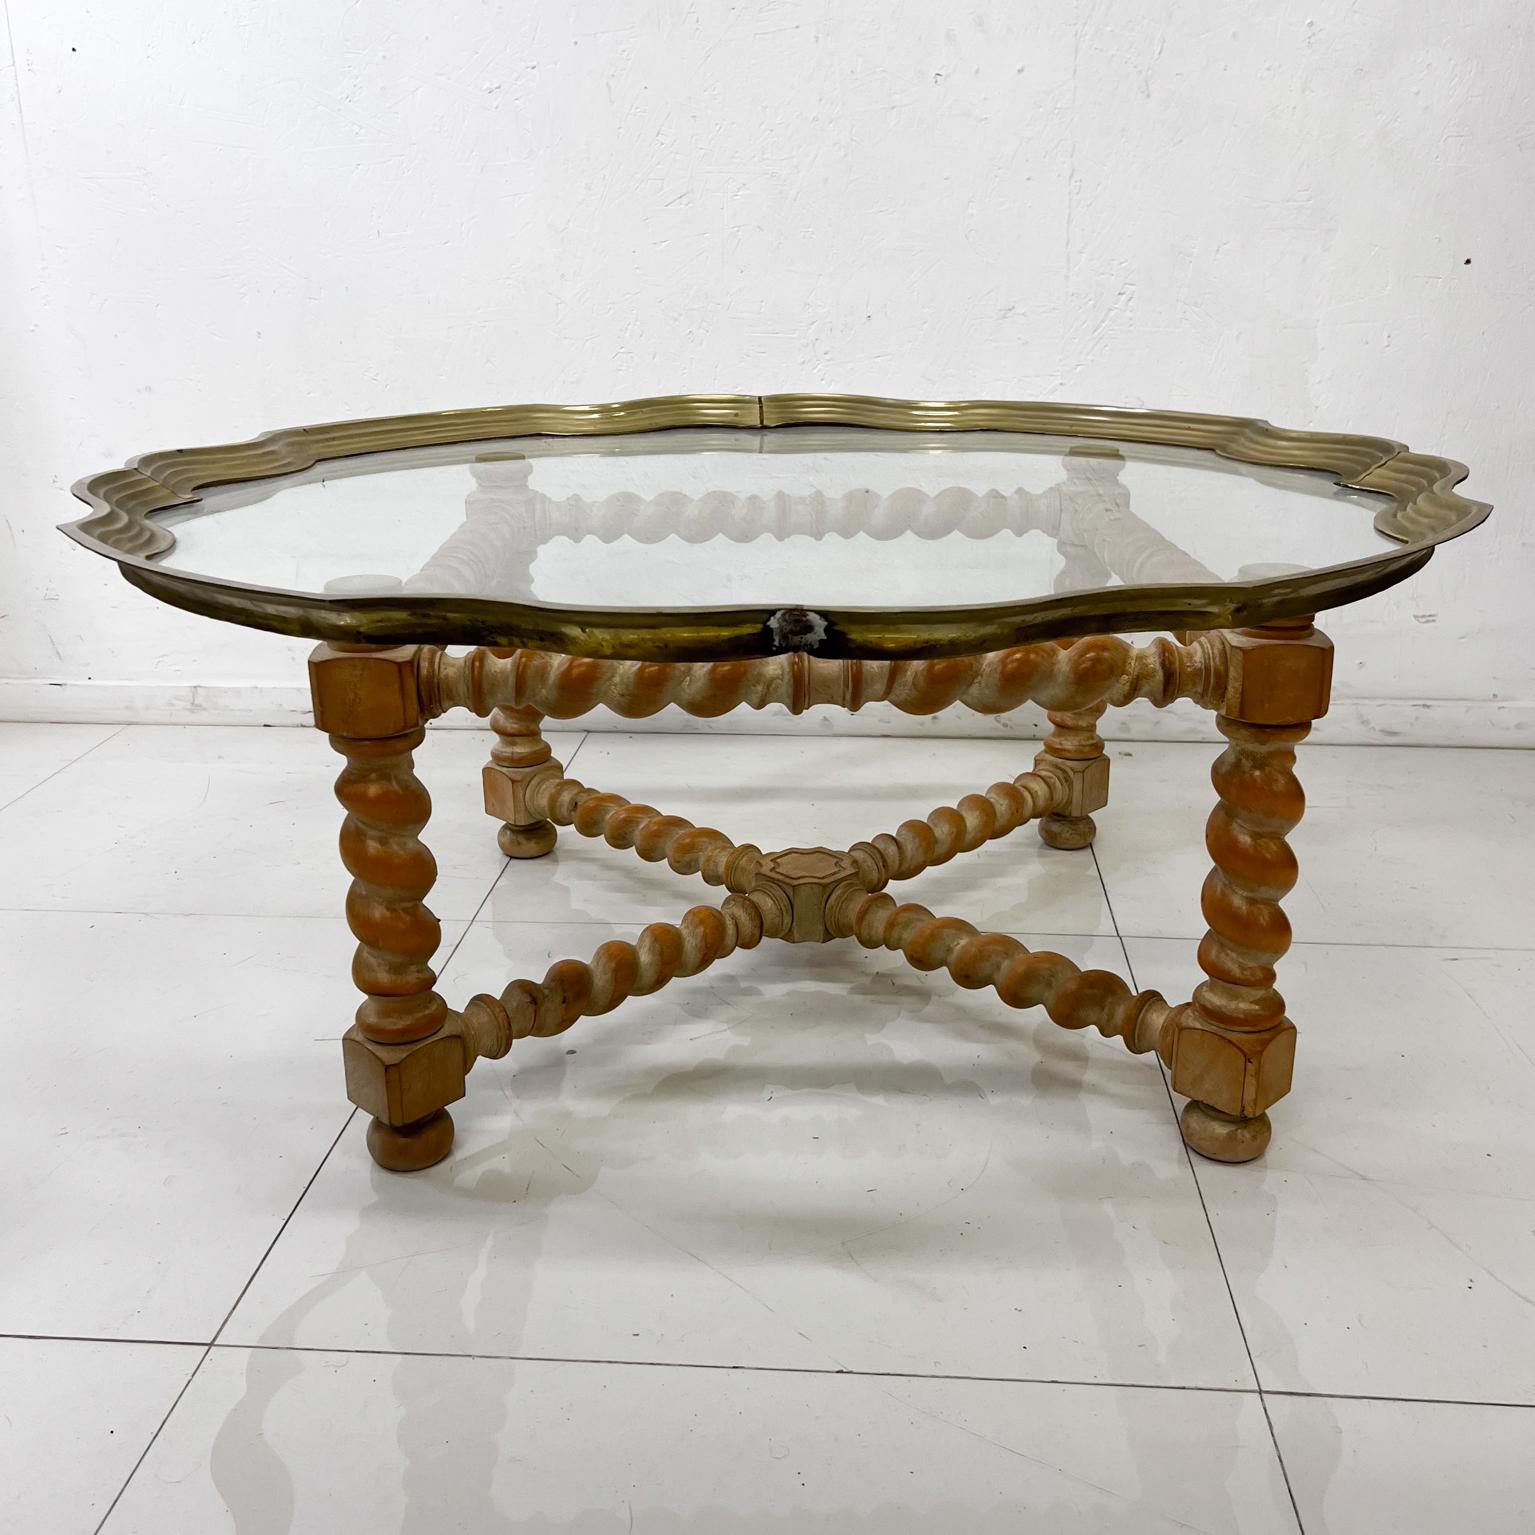 1970s Hollywood Regency Baker Furniture Elegant English Oak Barley Twist Cocktail Table
With Brass and Glass Tabletop
Designer Michael Taylor unmarked.
Sculptural brass tray top features a scalloped edge inset with a pane of glass.
41 x 41 x 17